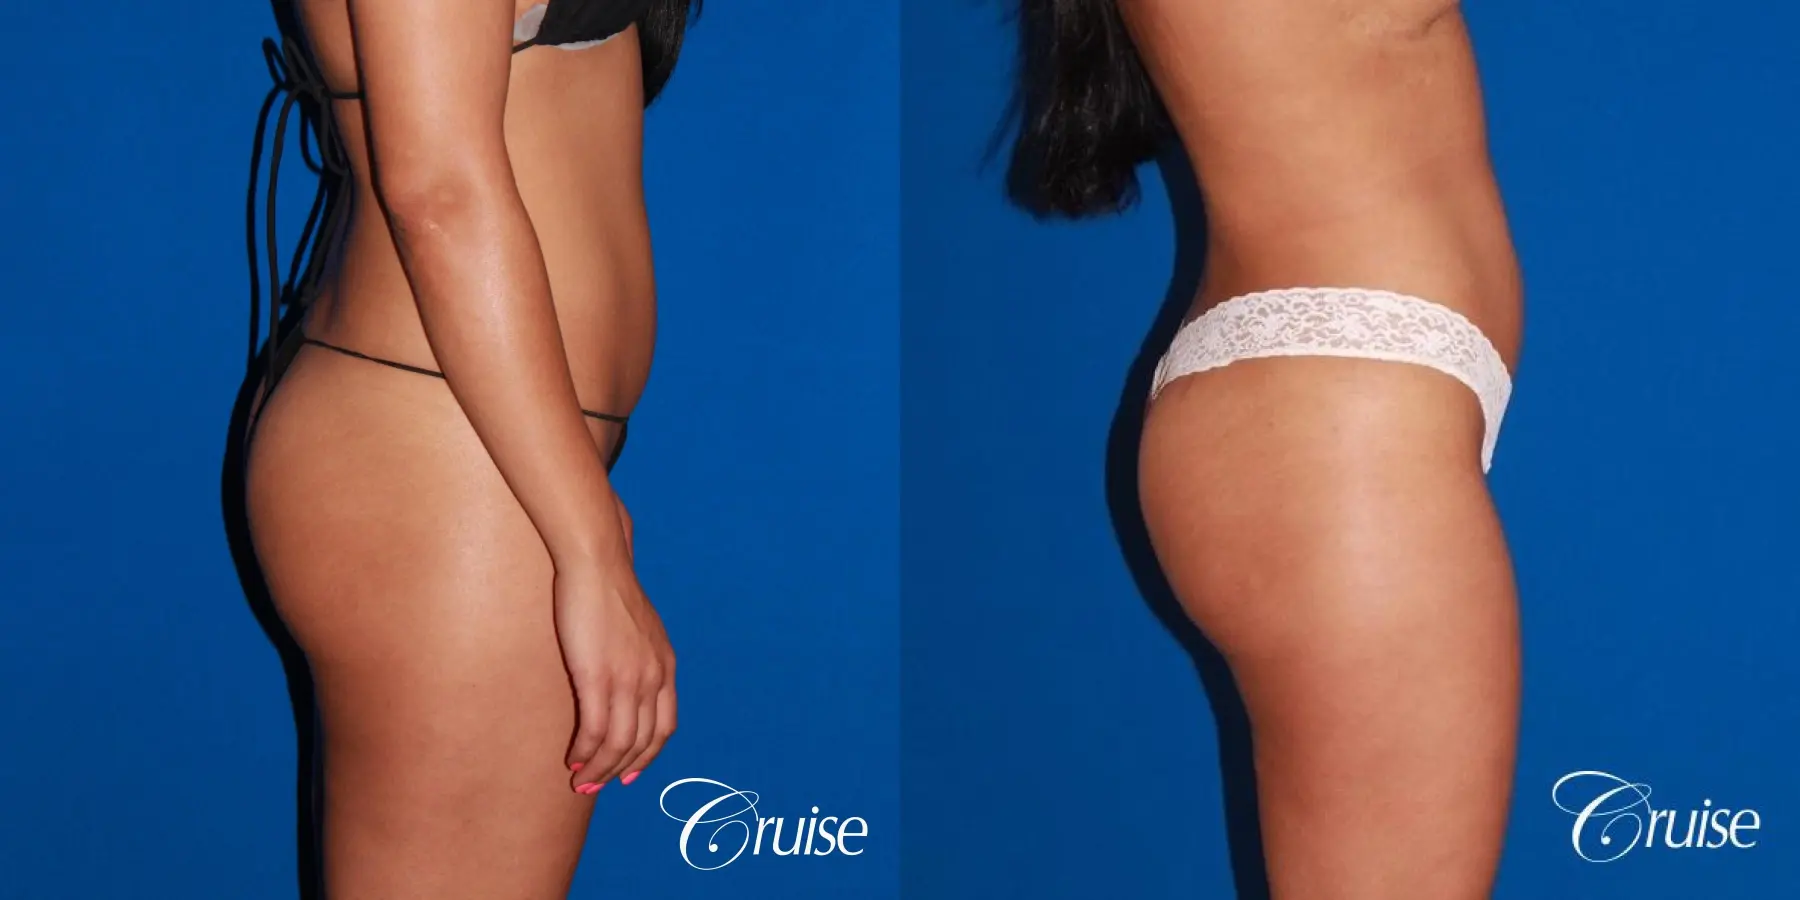 Liposuction Before & After Gallery: Patient 61